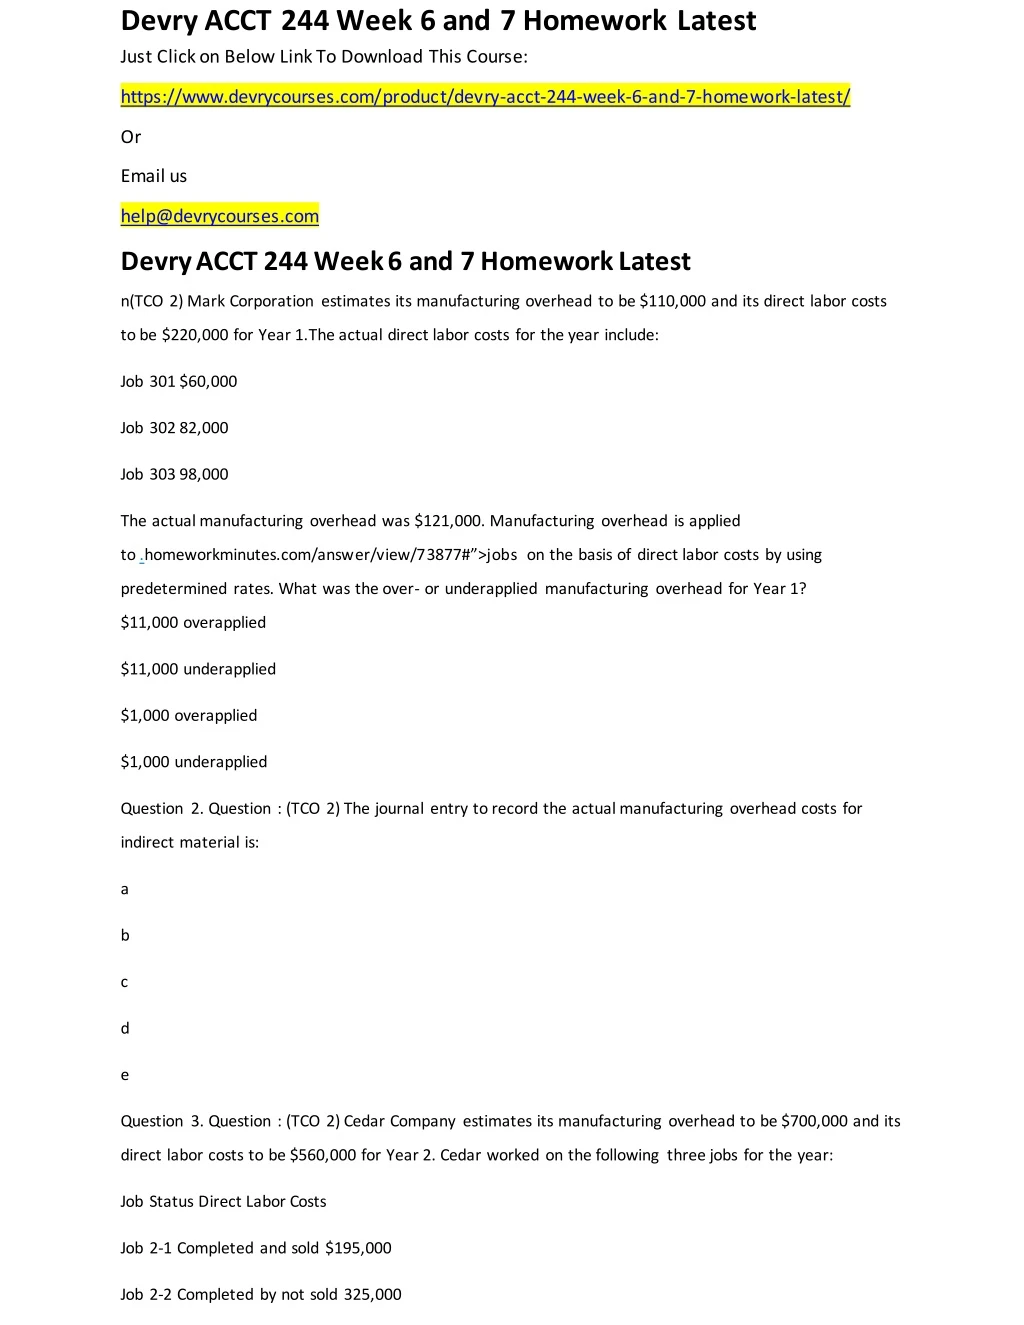 devry acct 244 week 6 and 7 homework latest just